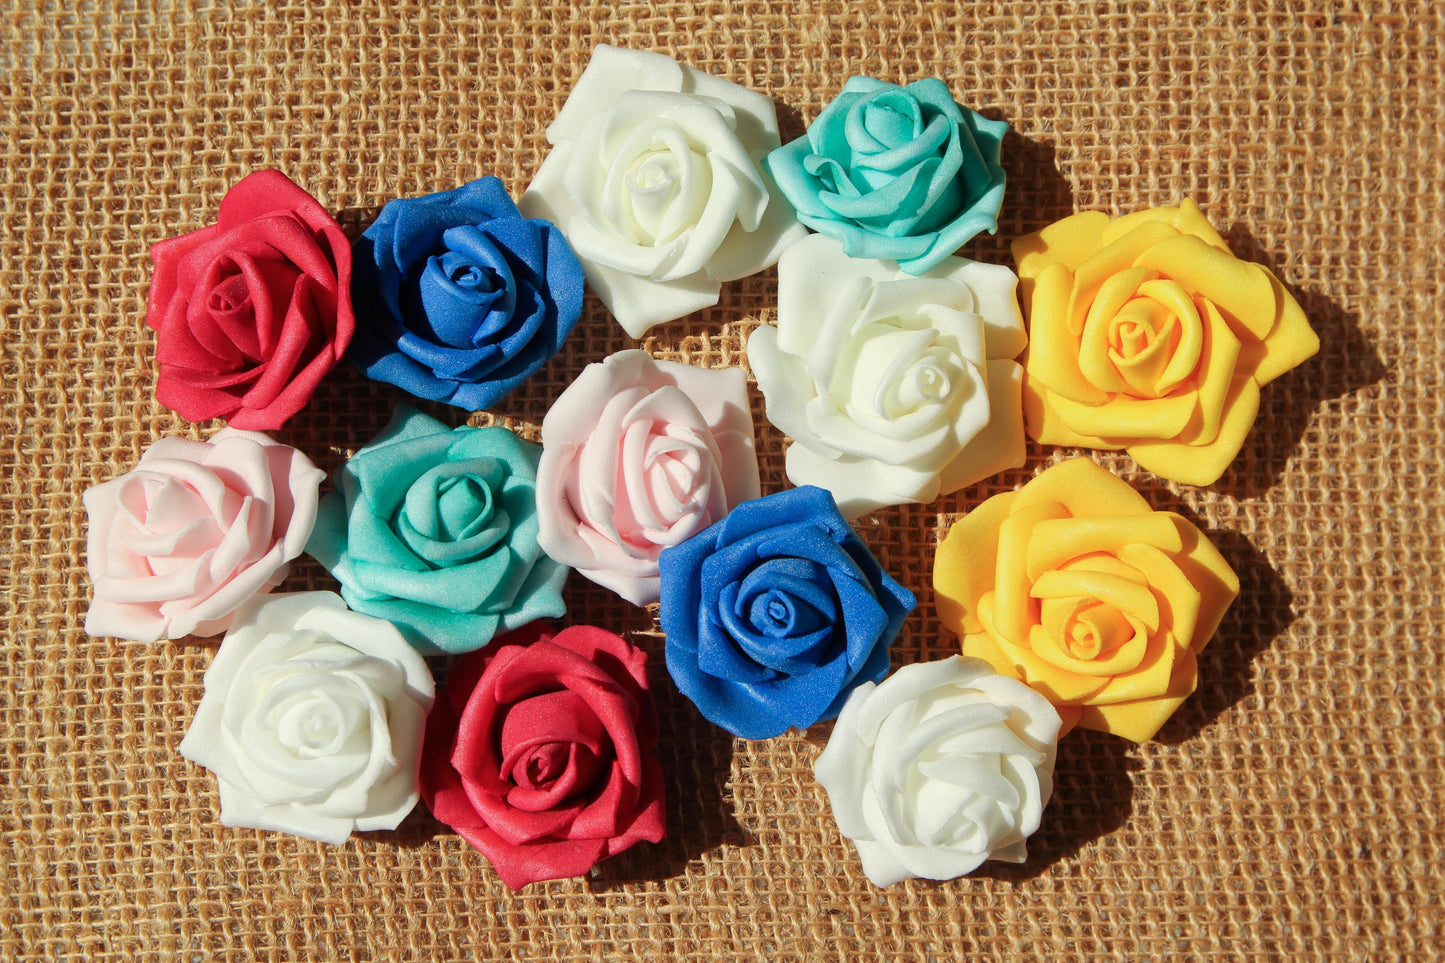 Small Foam Flowers Without Stem (12 pieces)